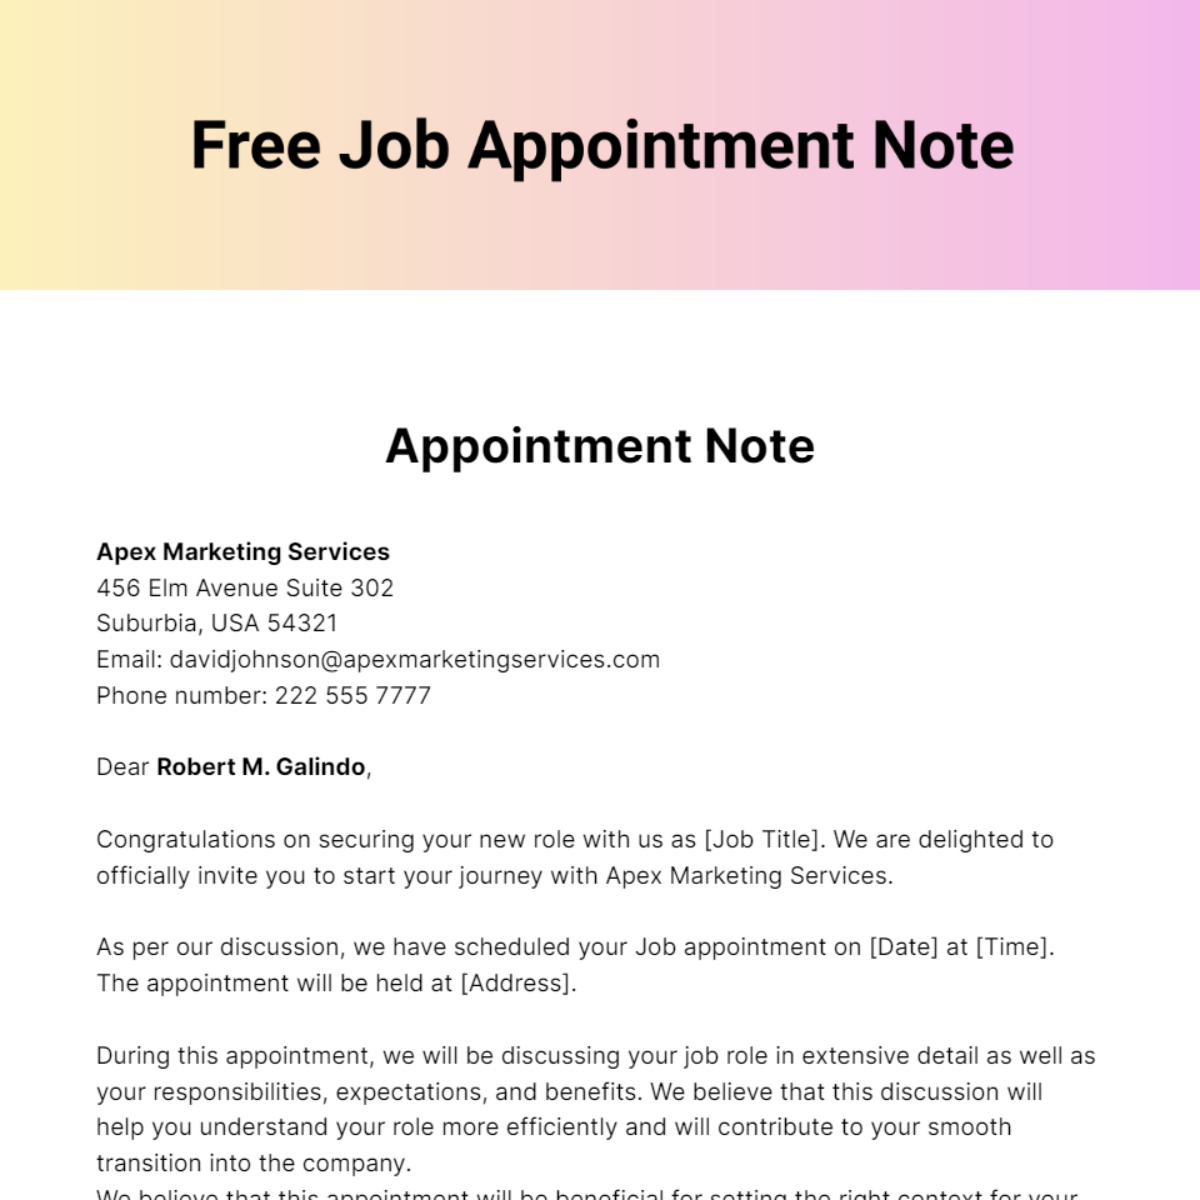 Job Appointment Note Template